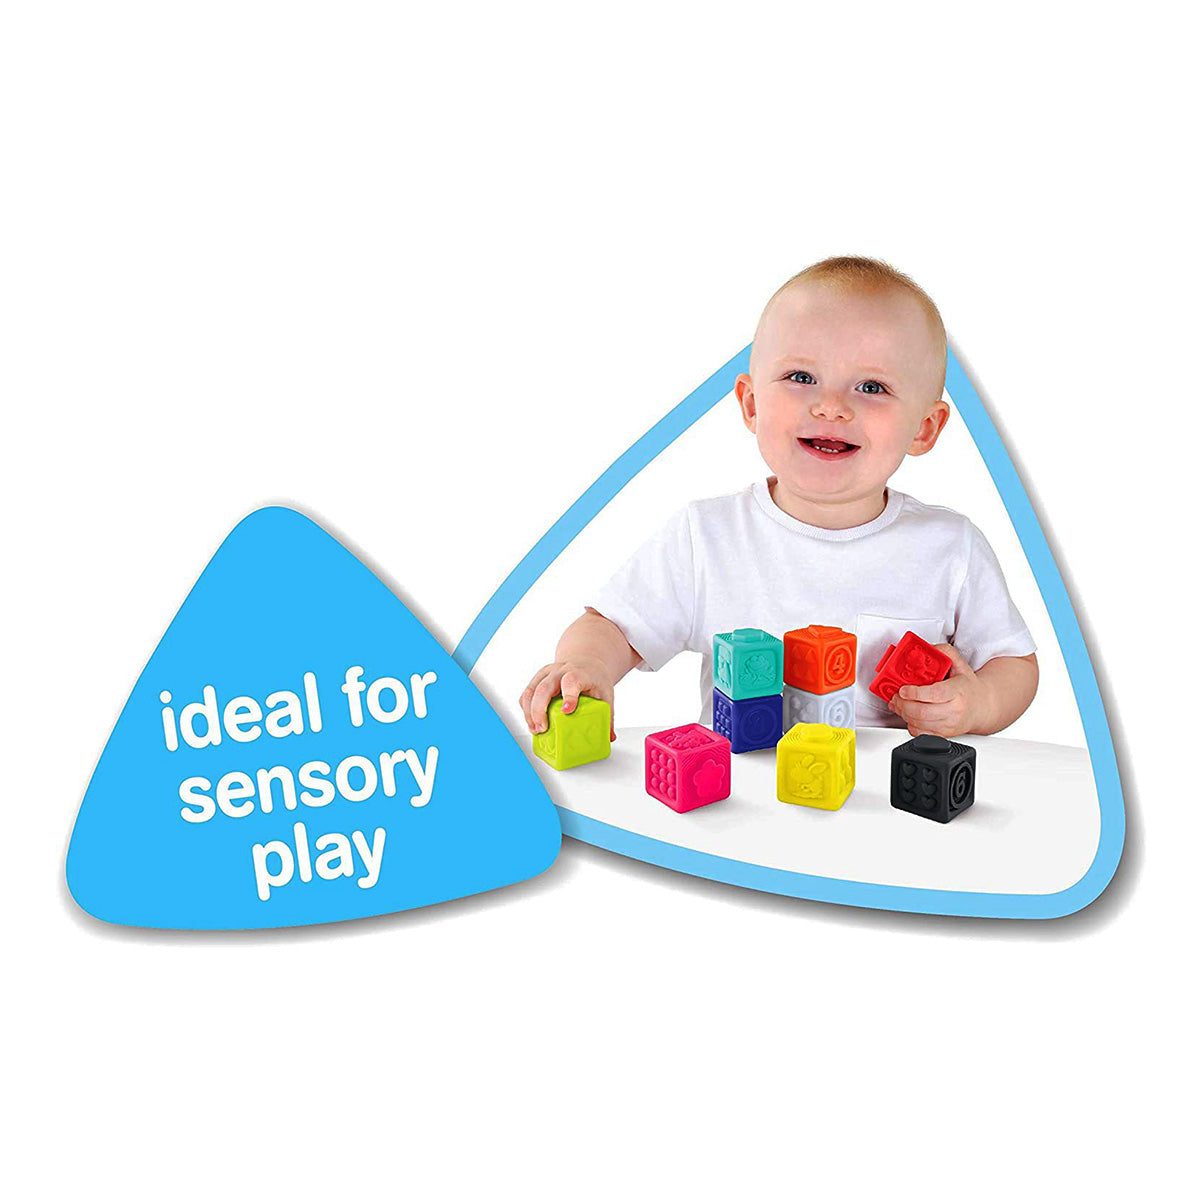 Early Learning Centre Squeezy Stacking Blocks